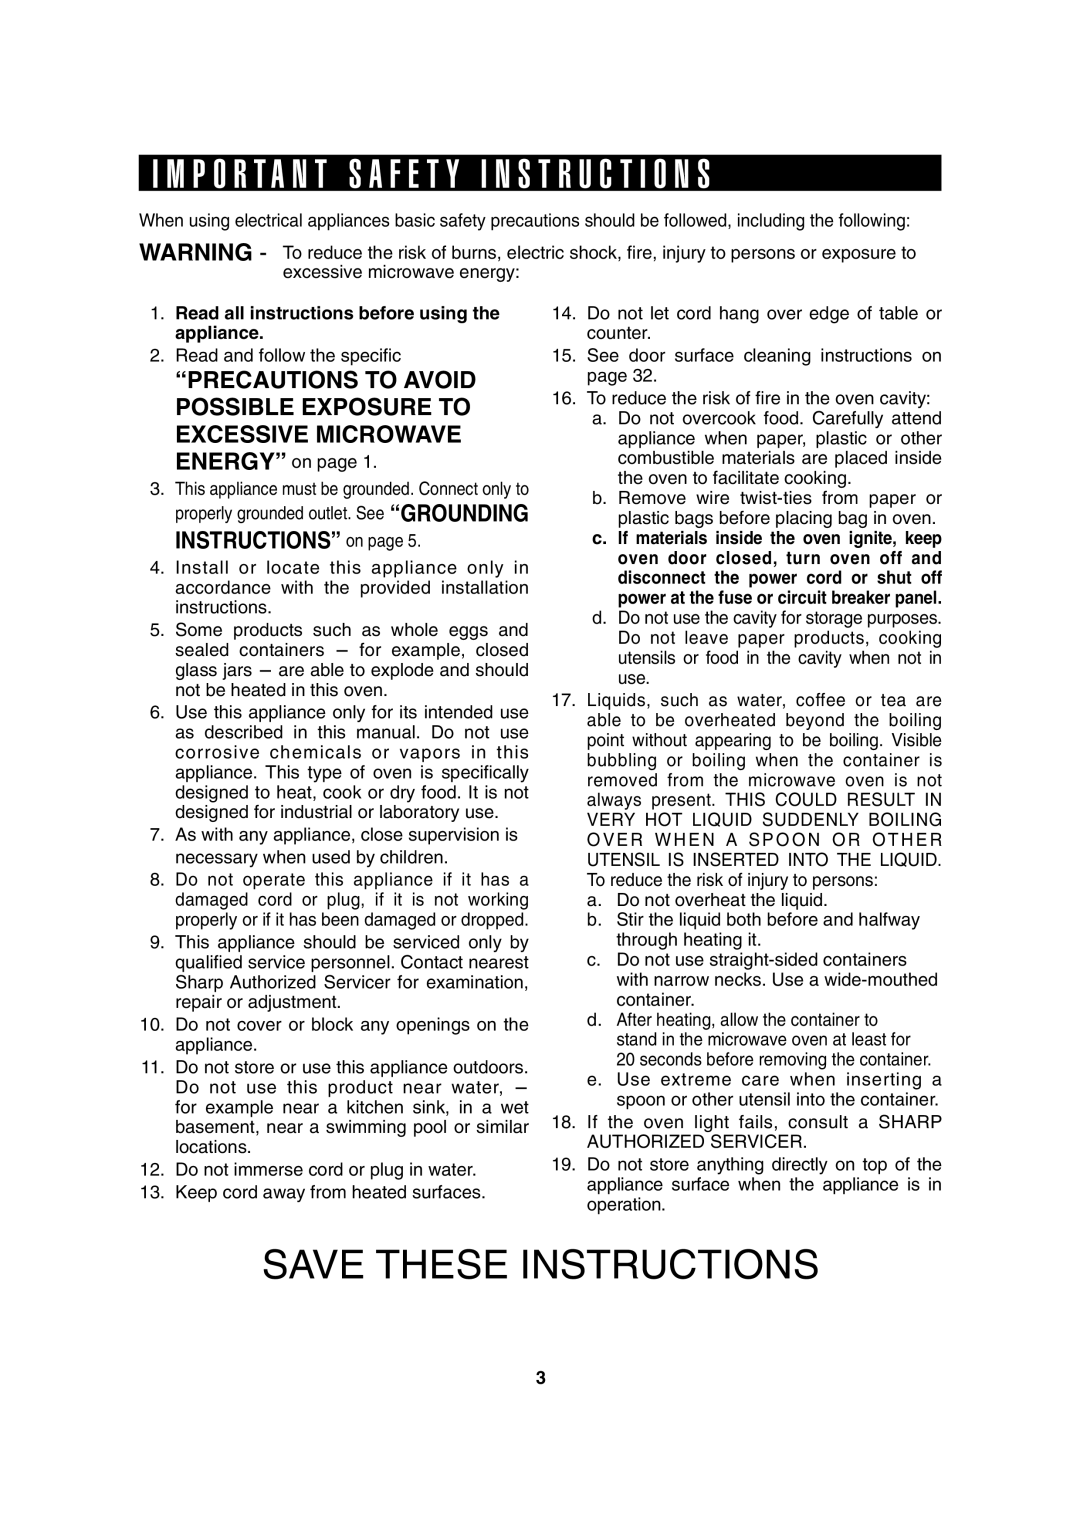 Sharp AX-1100R Save These Instructions, I M P O R T A N T S A F E T Y I N S T R U C T I O N S, INSTRUCTIONS” on page 